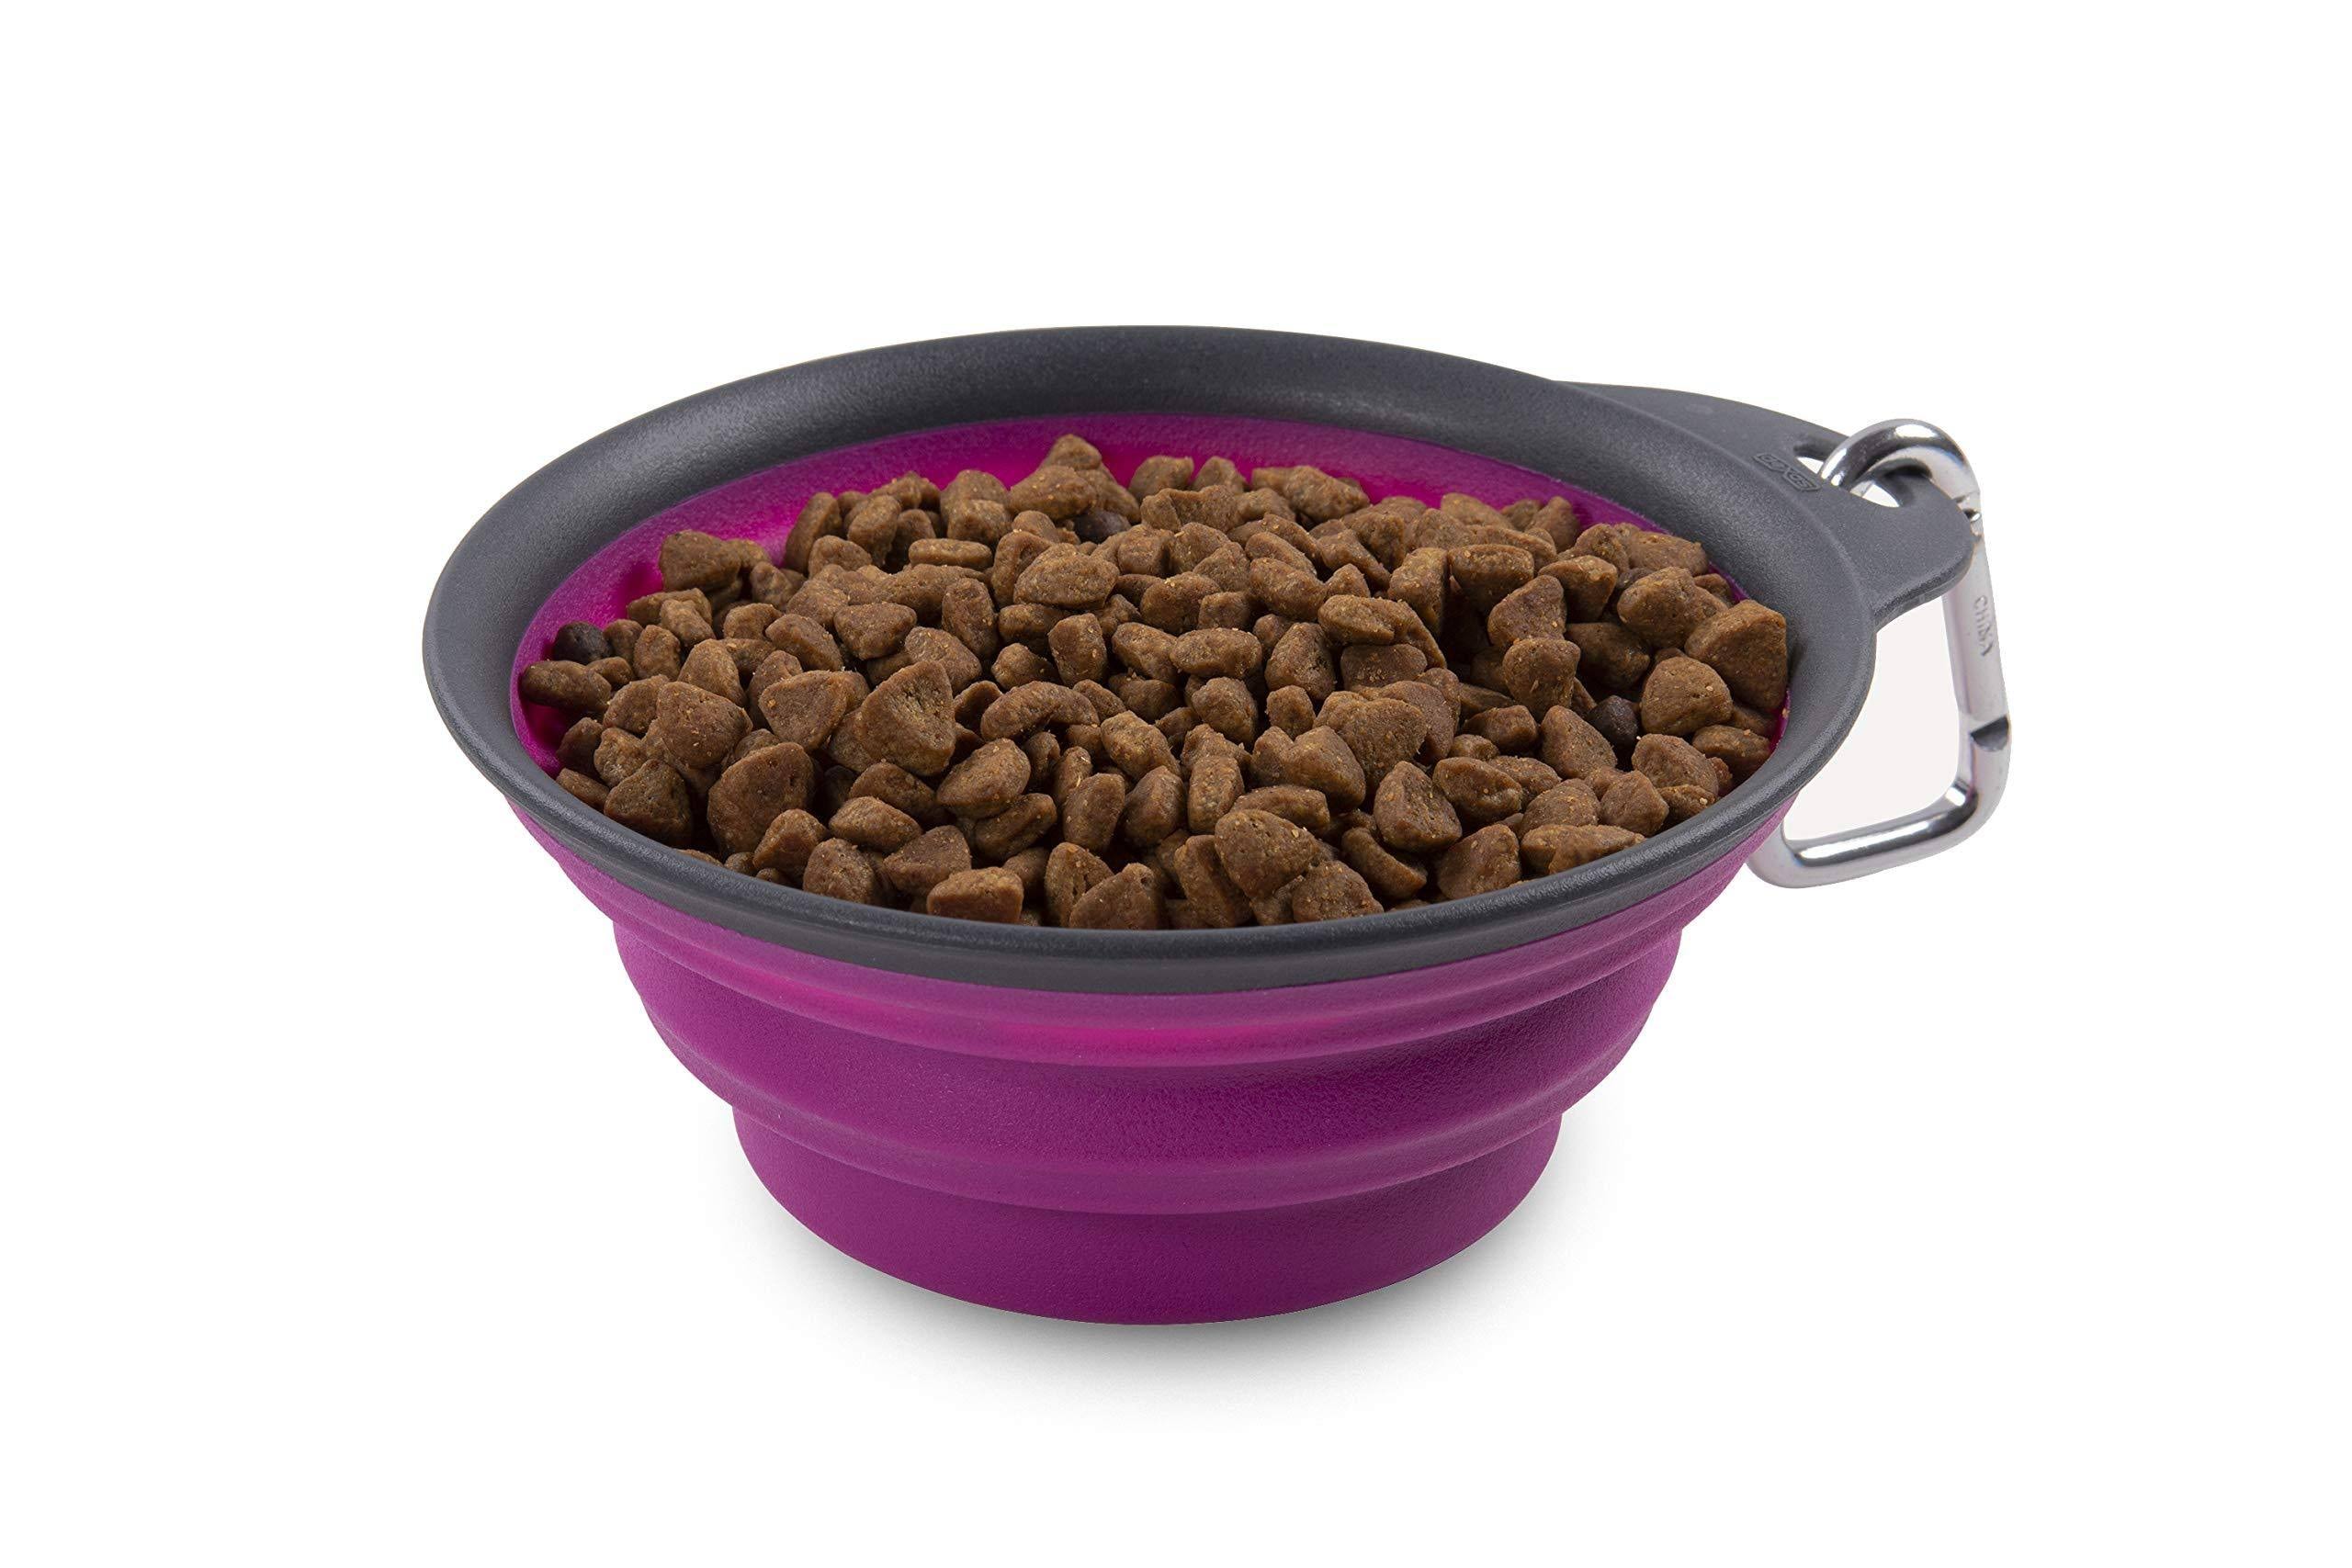 Dexas Pets Collapsible Travel Cup 2 Cup Capacity Fuchsia